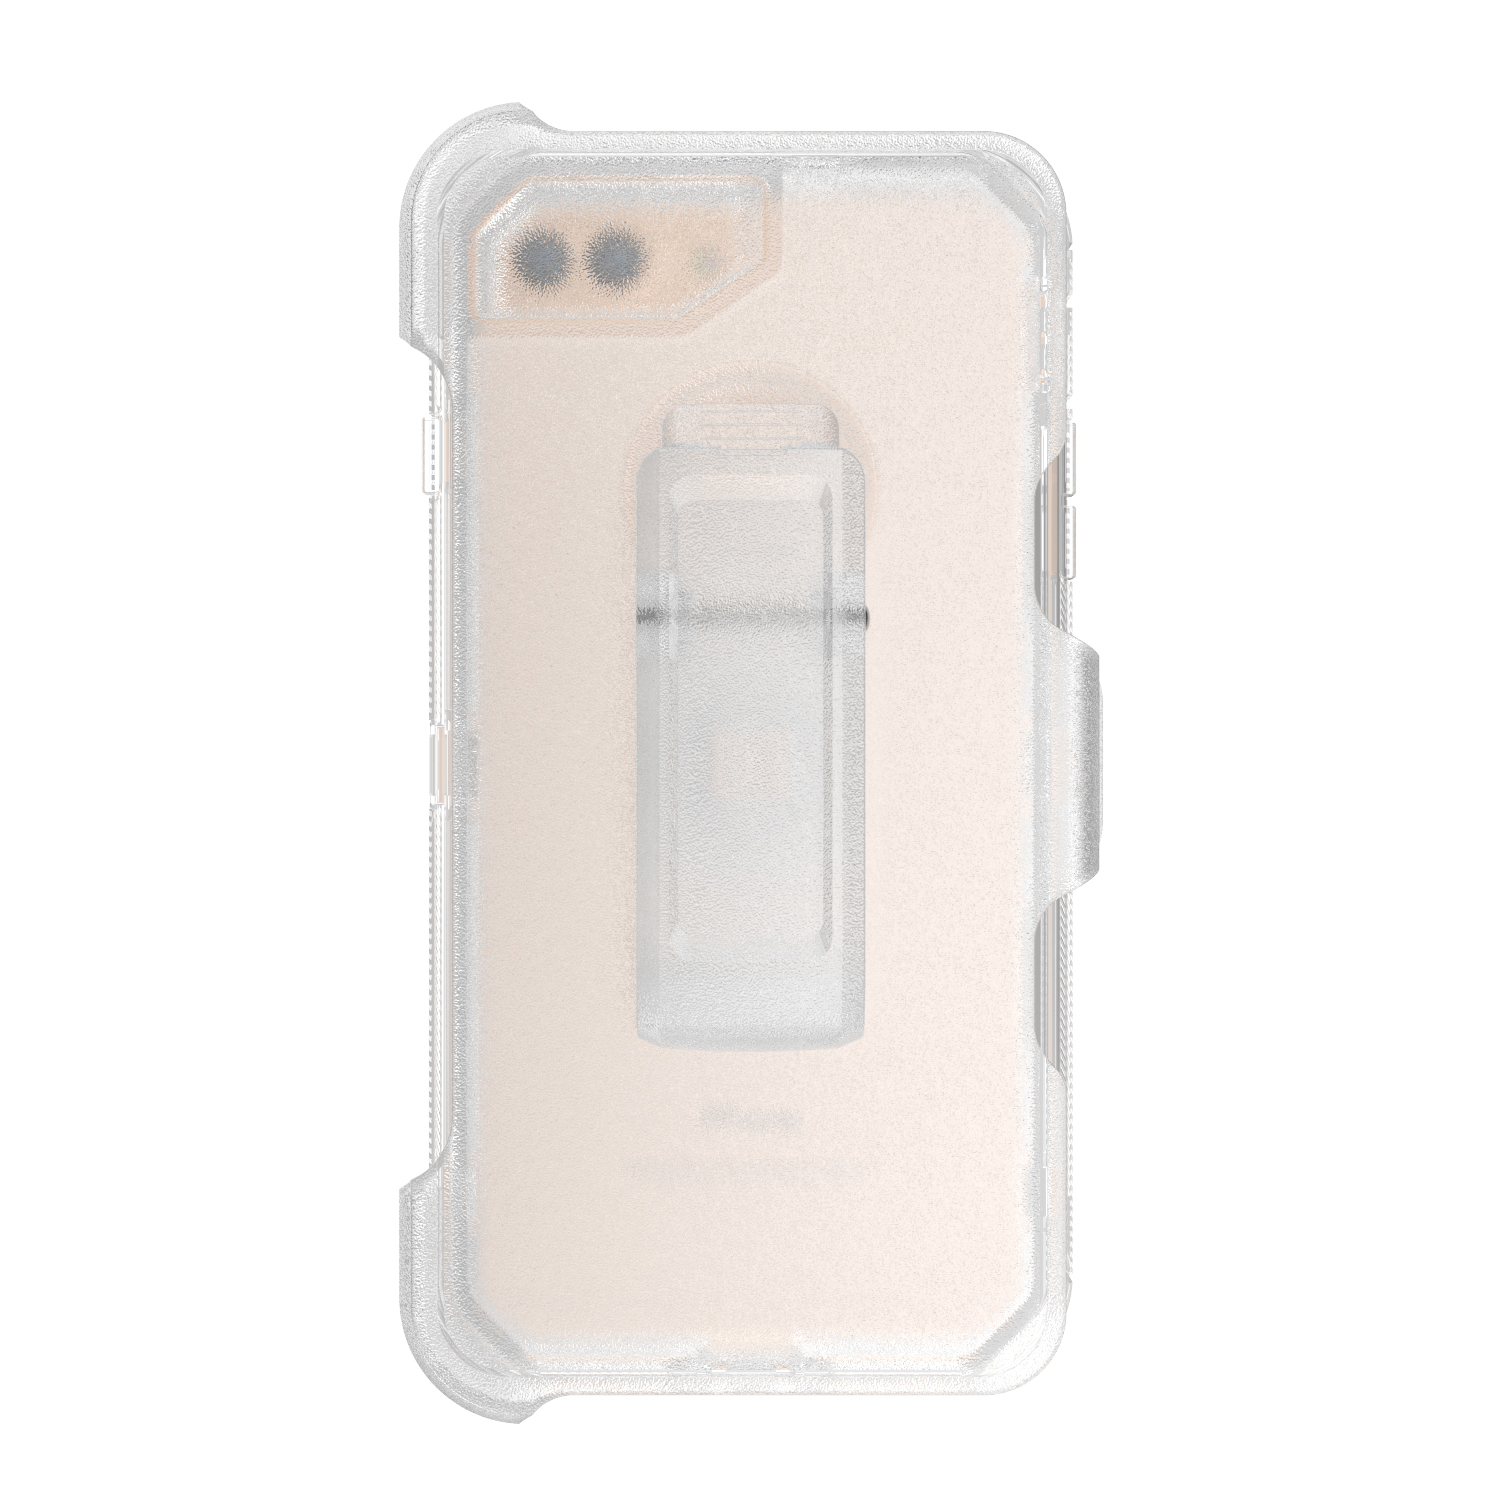 iPHONE Xr 6.1in Premium Armor Robot Clip Only (Clear)